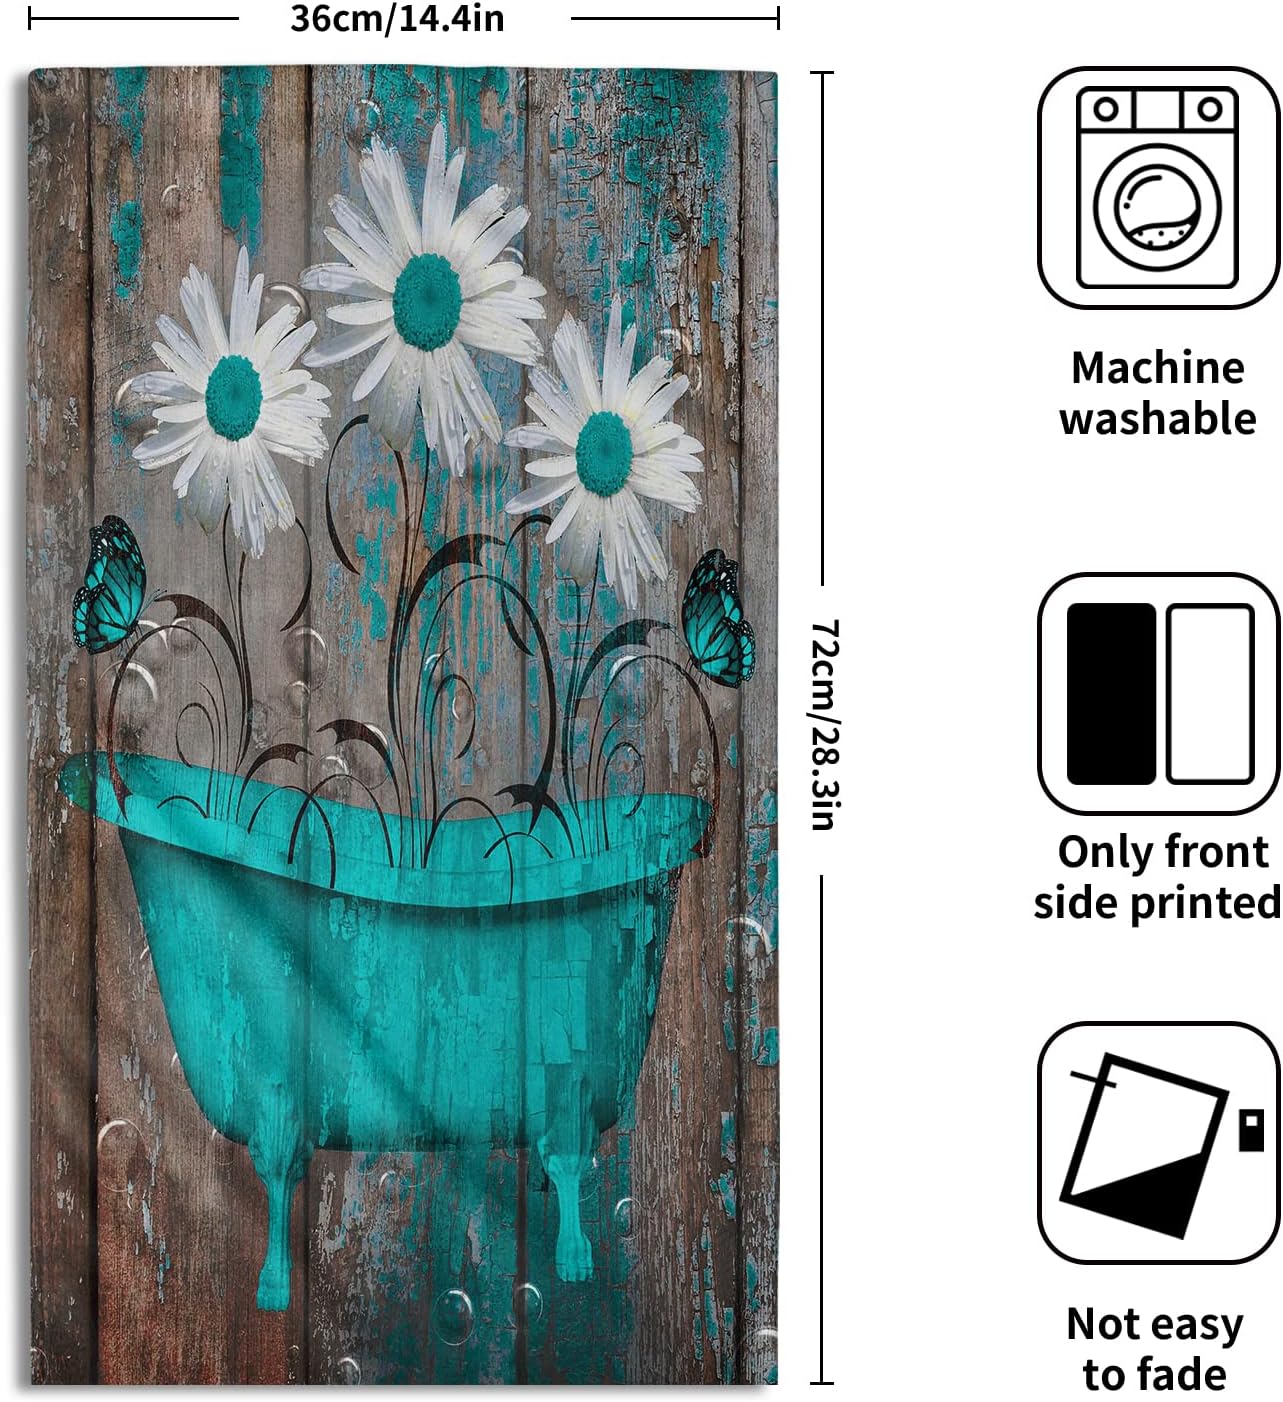 Homedevot Retro Barn Teal Green Brown Floral Hand Towels White Daisy Turquoise Butterfly Fingertip Towel Set Rustic Wooden Kitchen Decor Dish Towels for Bathroom, Hotel, Gym,Spa